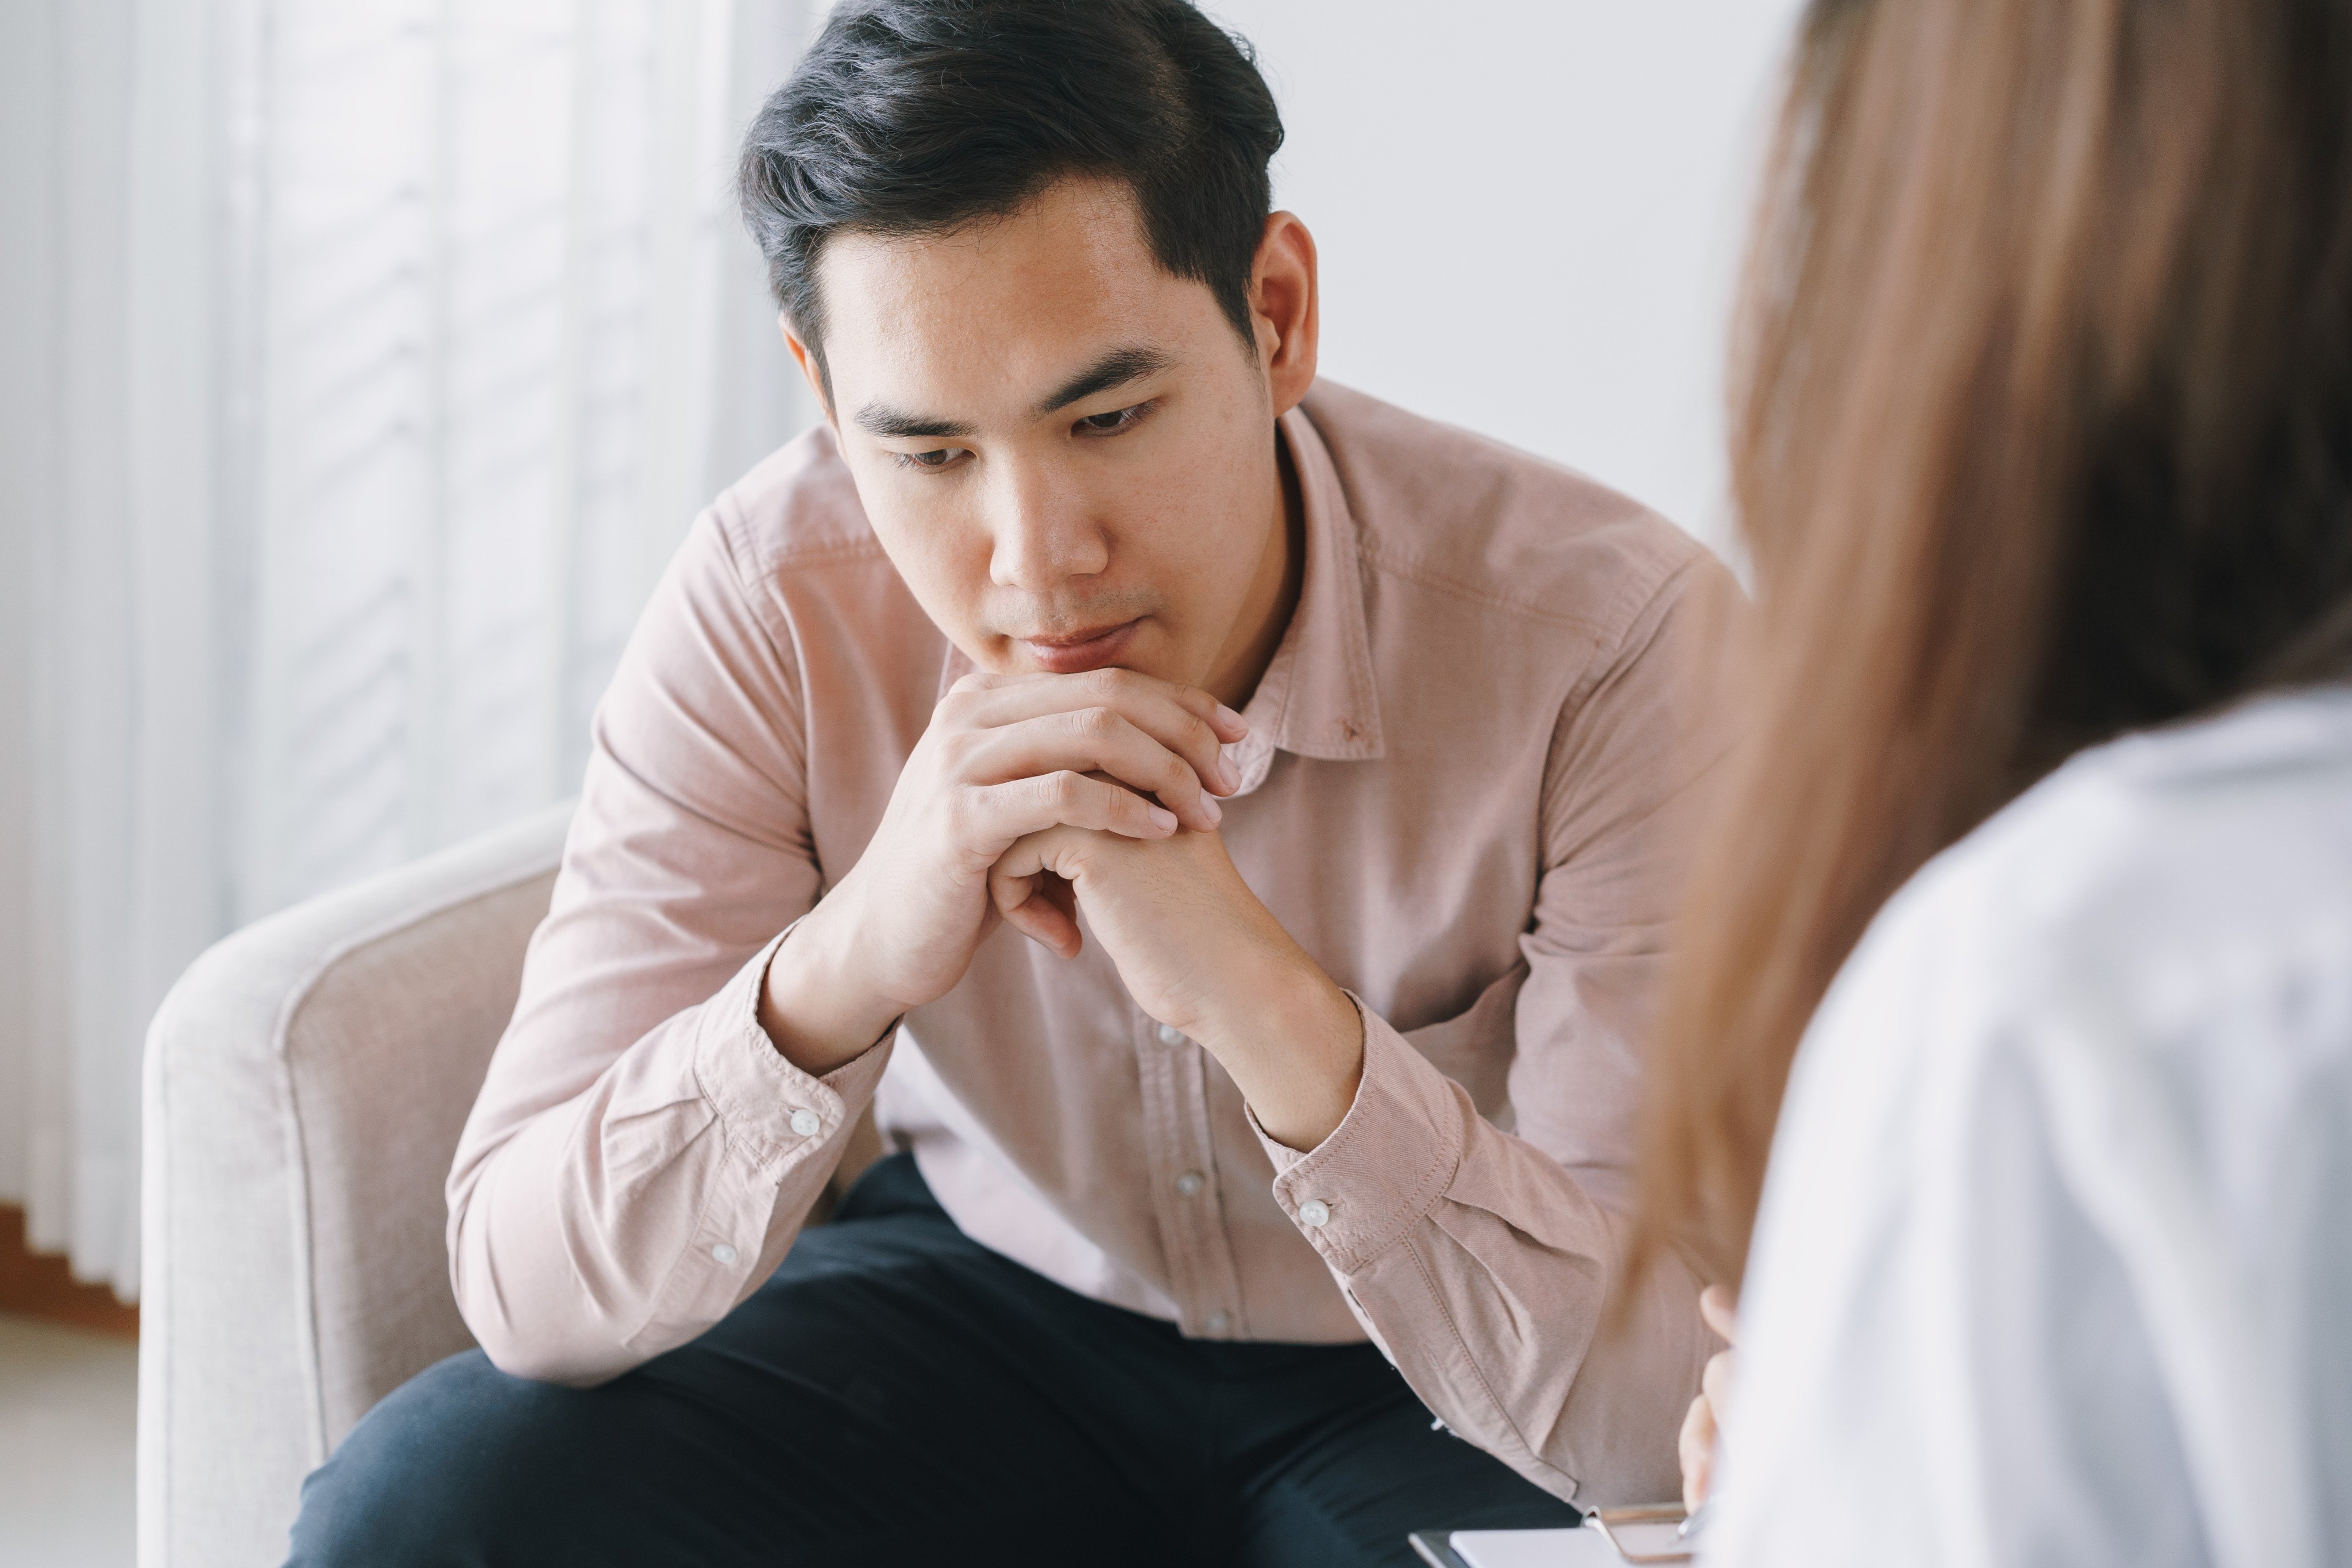 Hong Kong mental health charity Mind HK’s free Emotional Wellbeing Check-ins aim to help people who may otherwise not have access to support understand their emotional well-being status and needs. Photo: Shutterstock